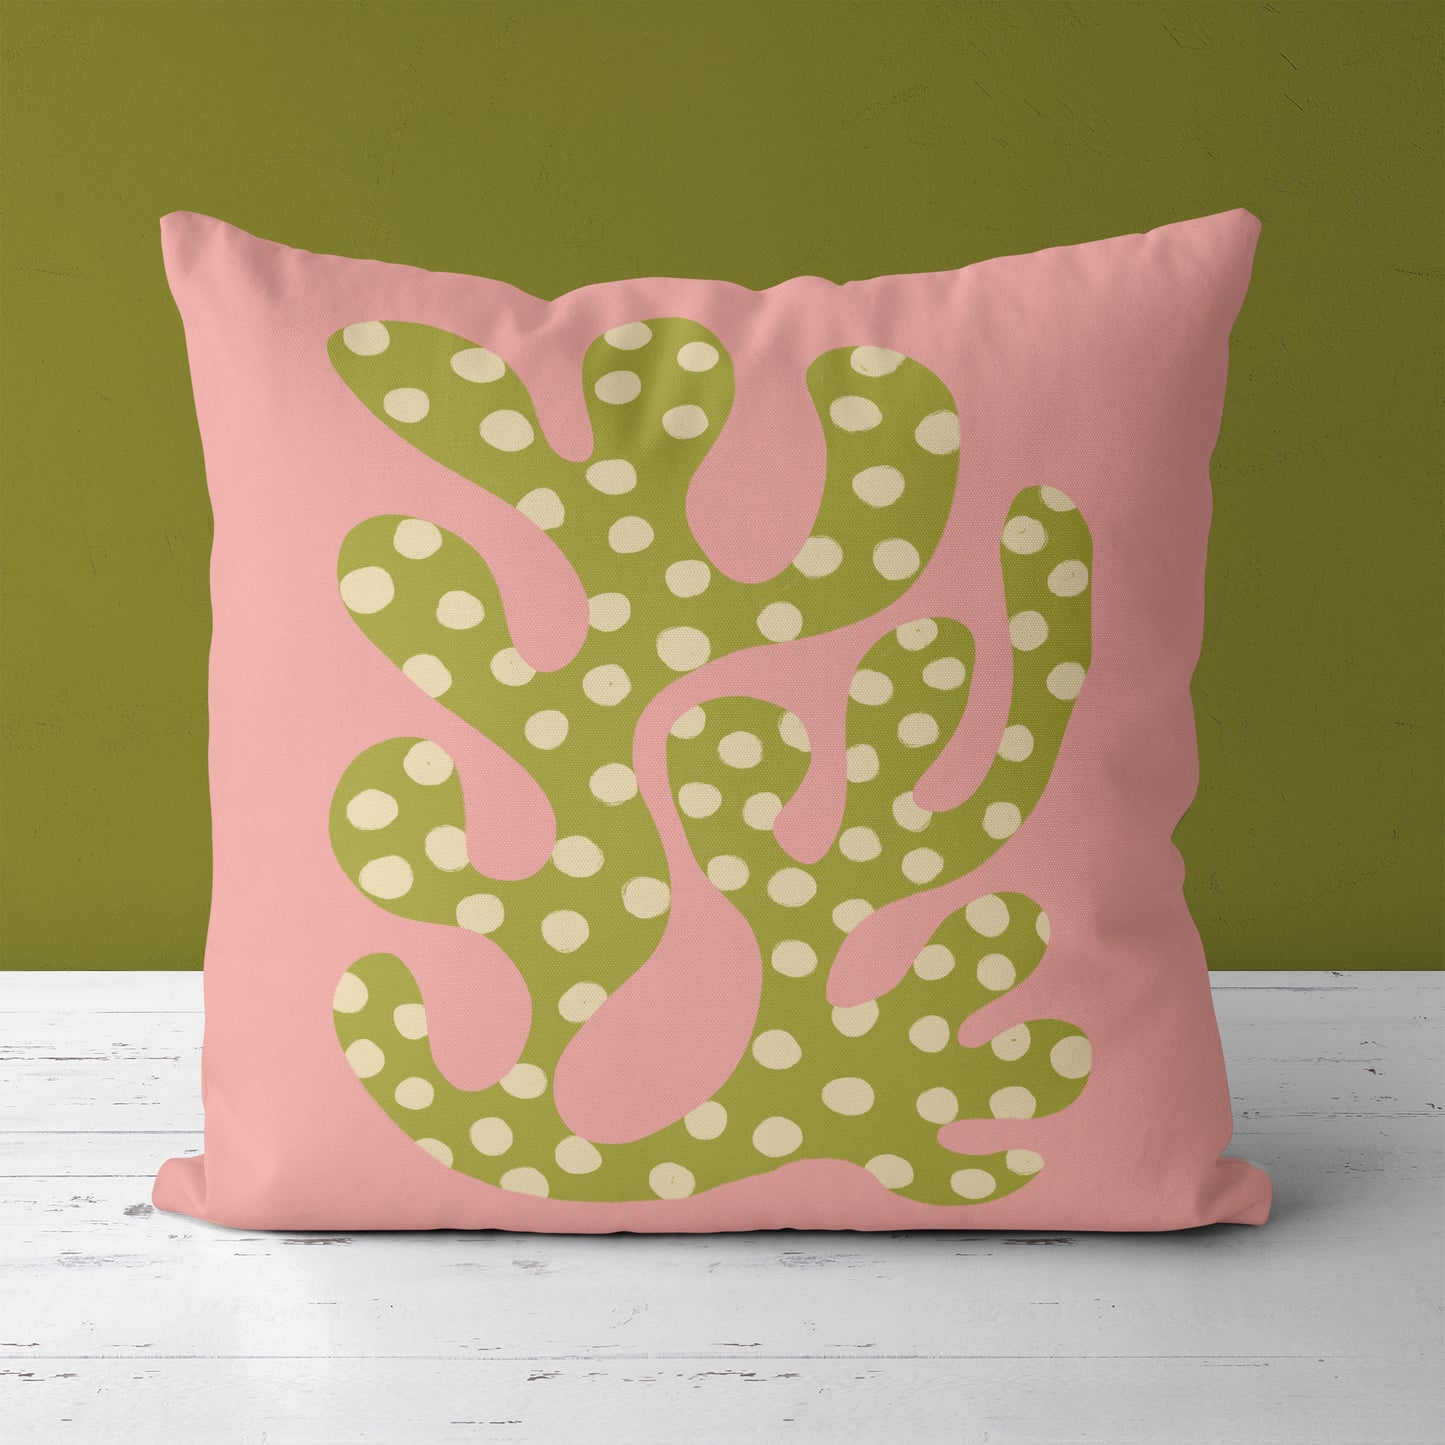 Pink Abstract Green Leaf Shapes Throw Pillow